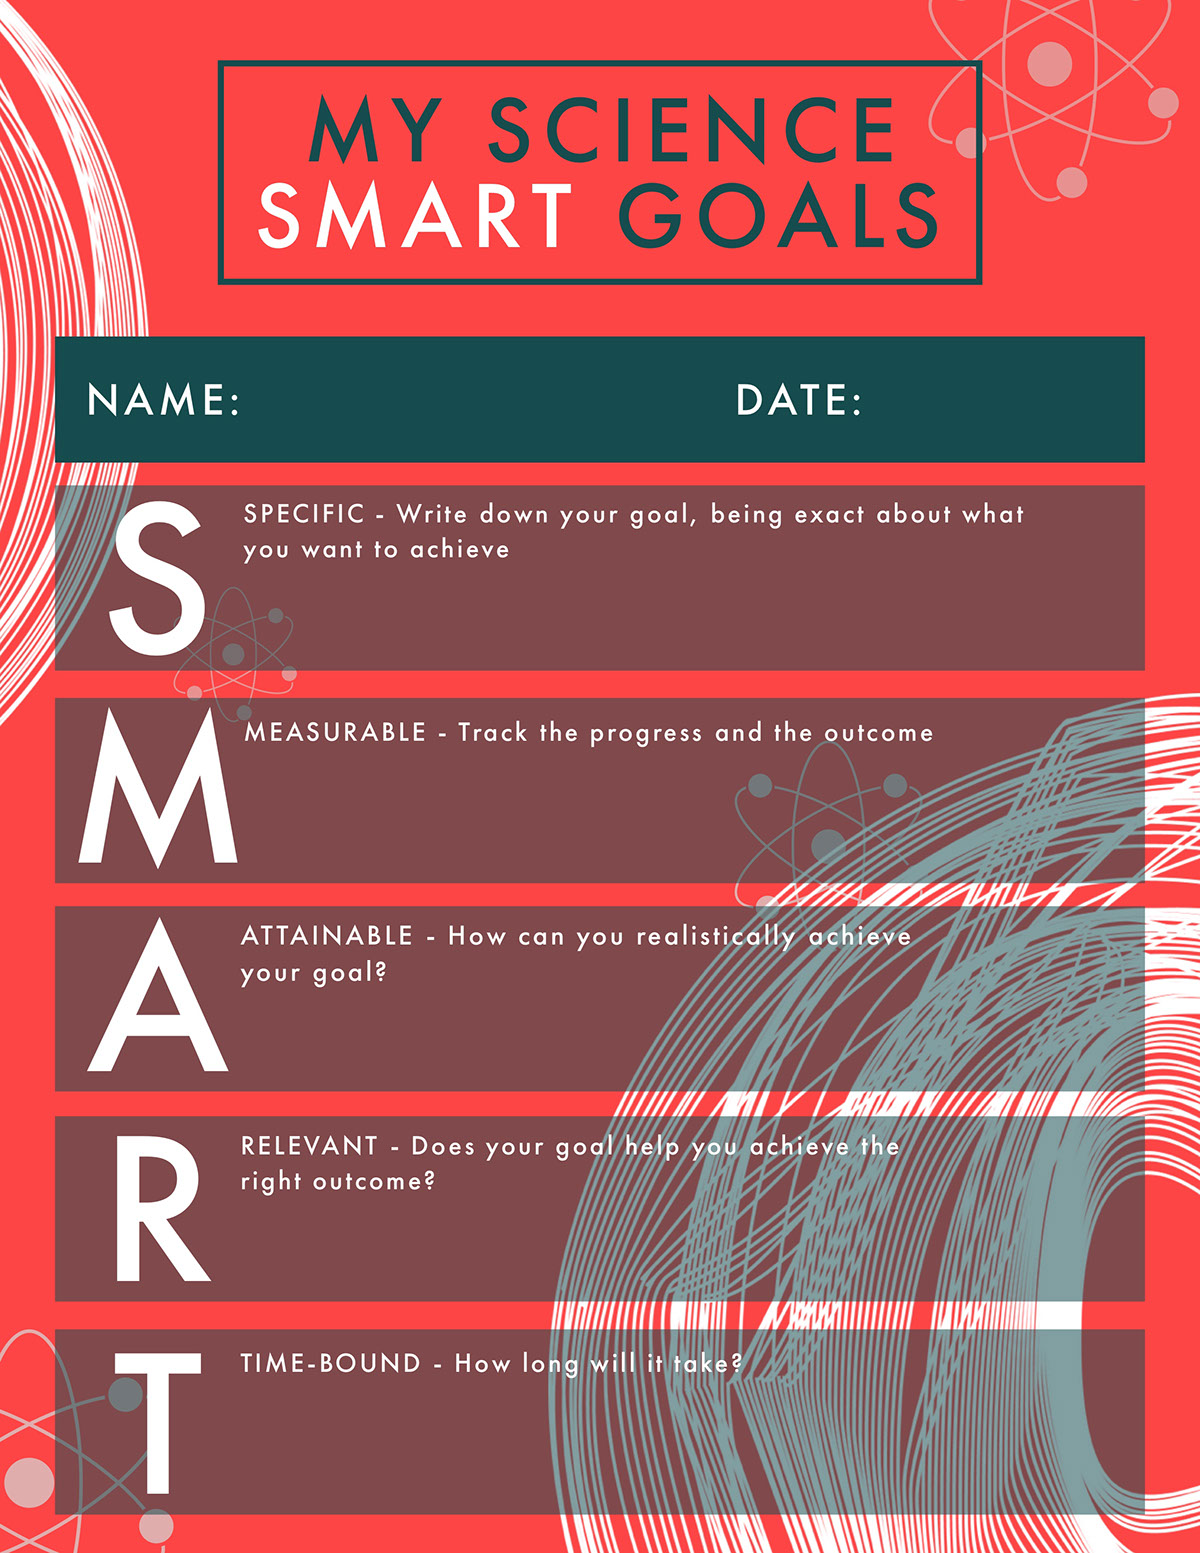 SMART Science Goals M A S R T MY SCIENCE SMART GOALS NAME: DATE: ATTAINABLE - How can you realistically achieve your goal? RELEVANT - Does your goal help you achieve the right outcome? TIME-BOUND - How long will it take? MEASURABLE - Track the progress and the outcome SPECIFIC - Write down your goal, being exact about what you want to achieve